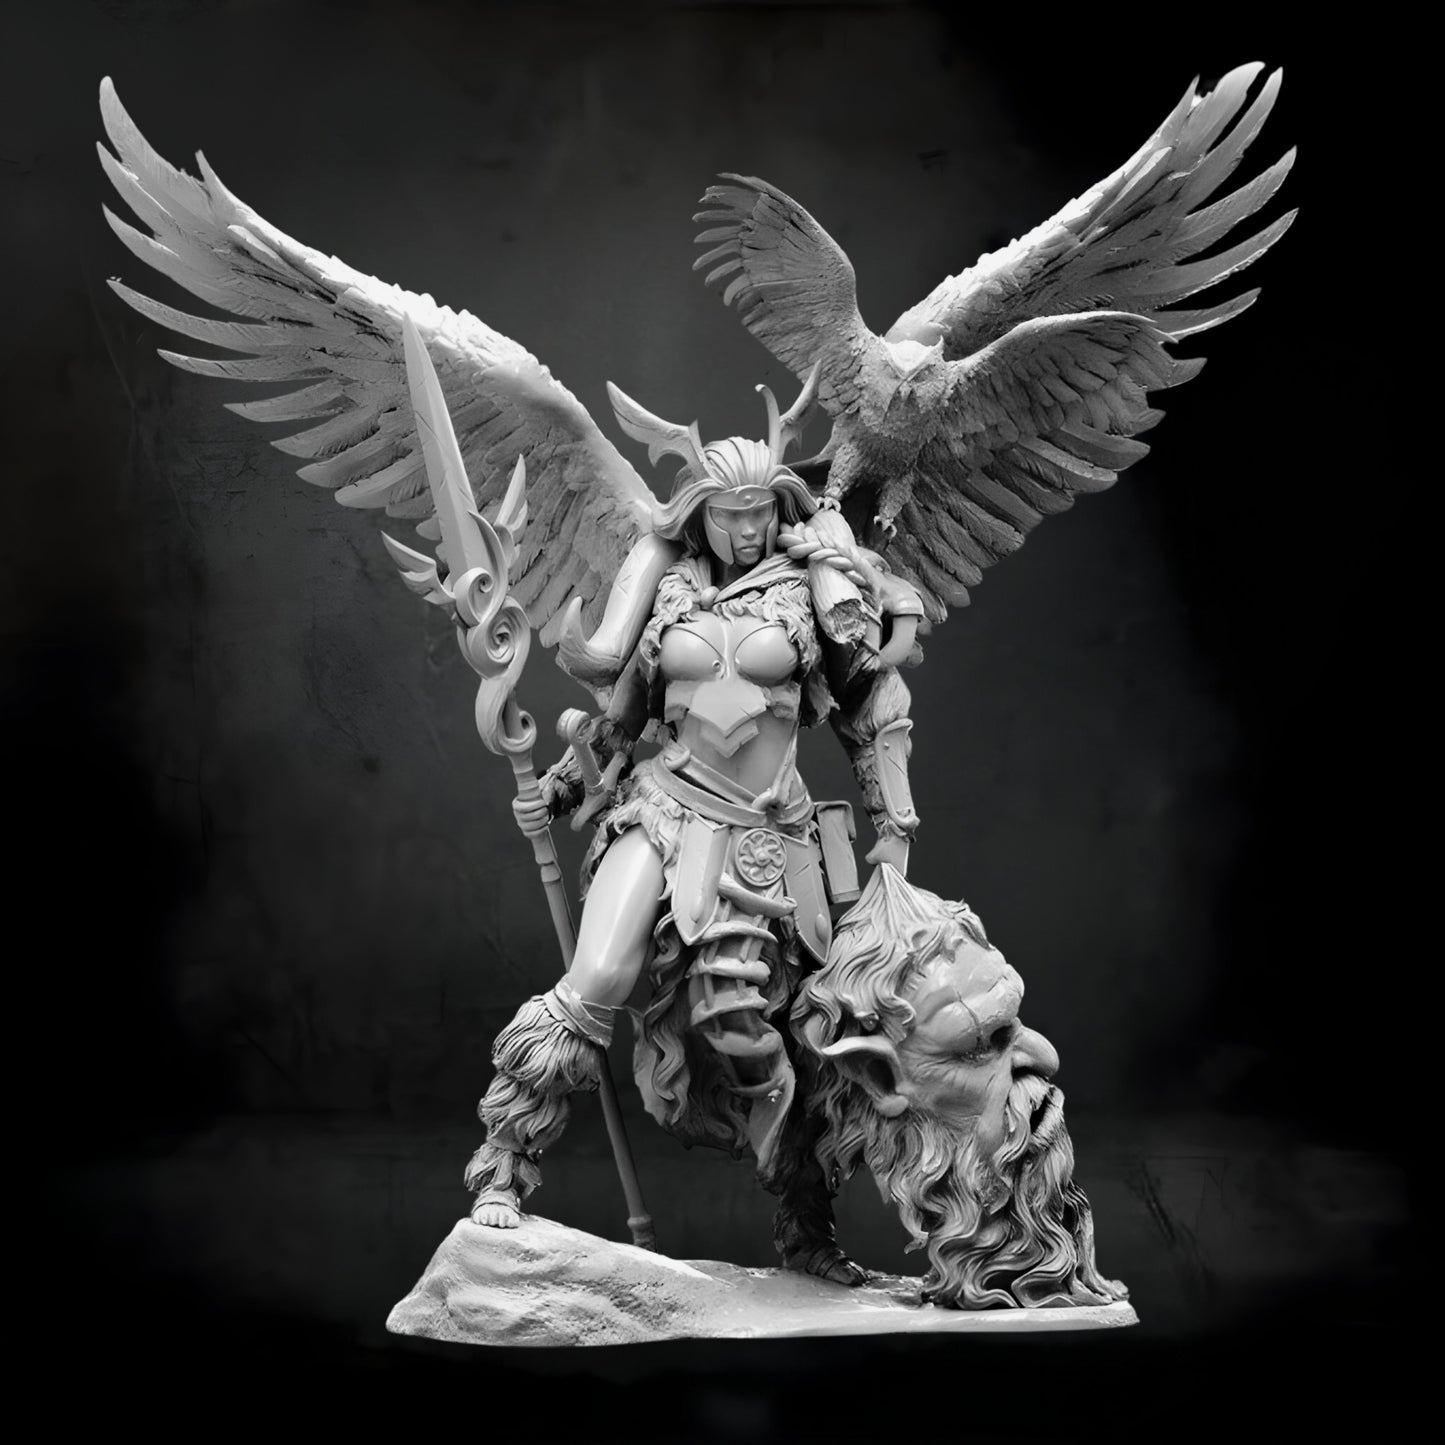 18+ Collector's 3D Printed Model:  1/24 Resin model kits DIY resin figure colorless and self-assembled.